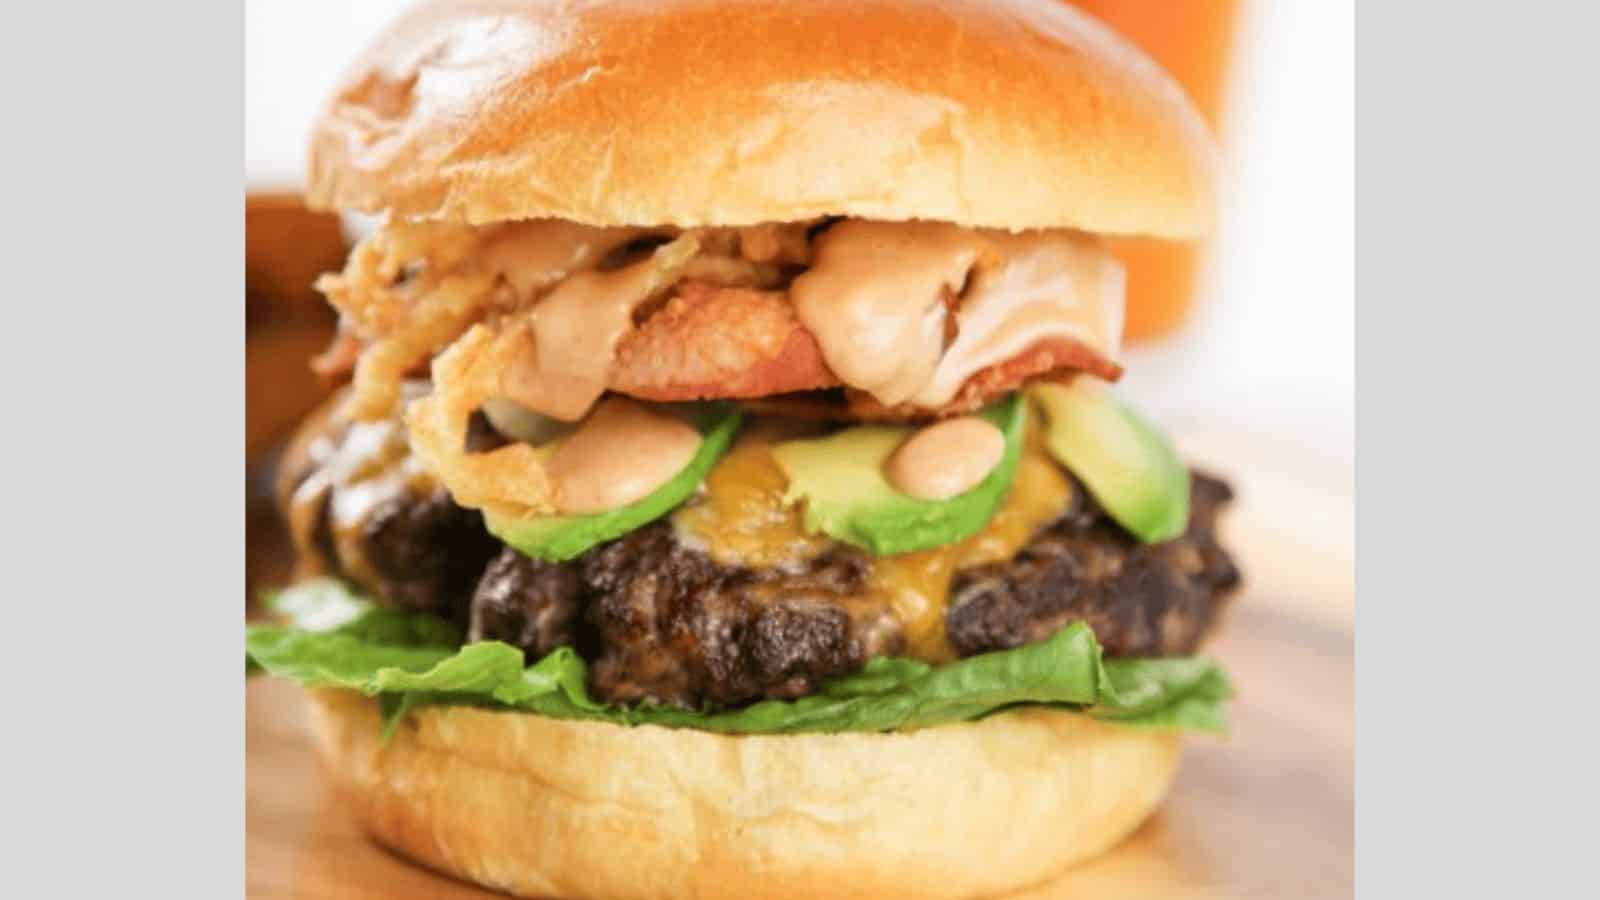 A cheeseburger topped with avocado, crispy onion strings, and a secret burger sauce.